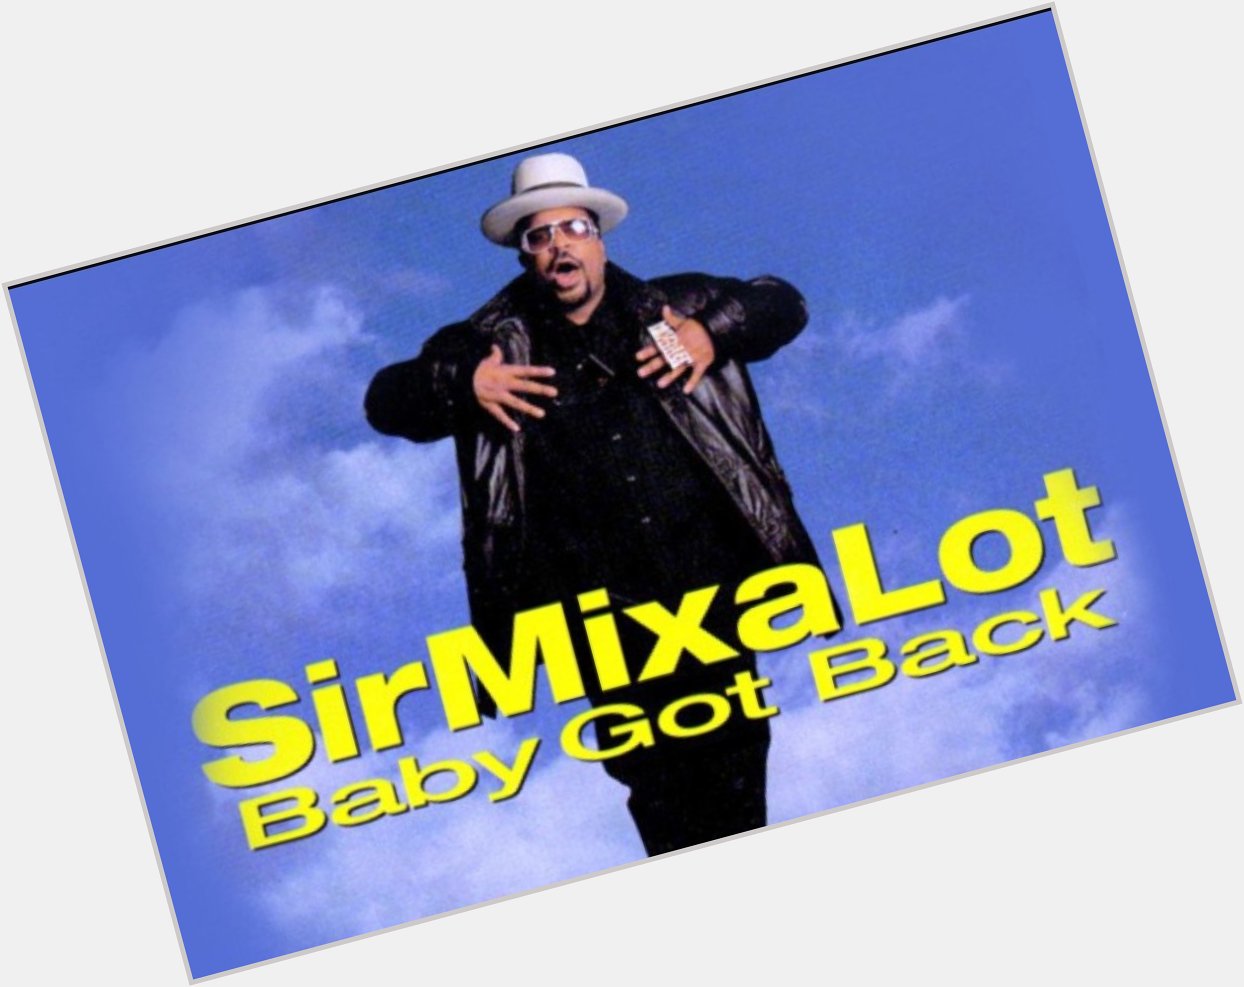 HAPPY BIRTHDAY Anthony Ray, better known as Sir Mix a Lot, born August 12, 1963 in Seattle, Washington.   